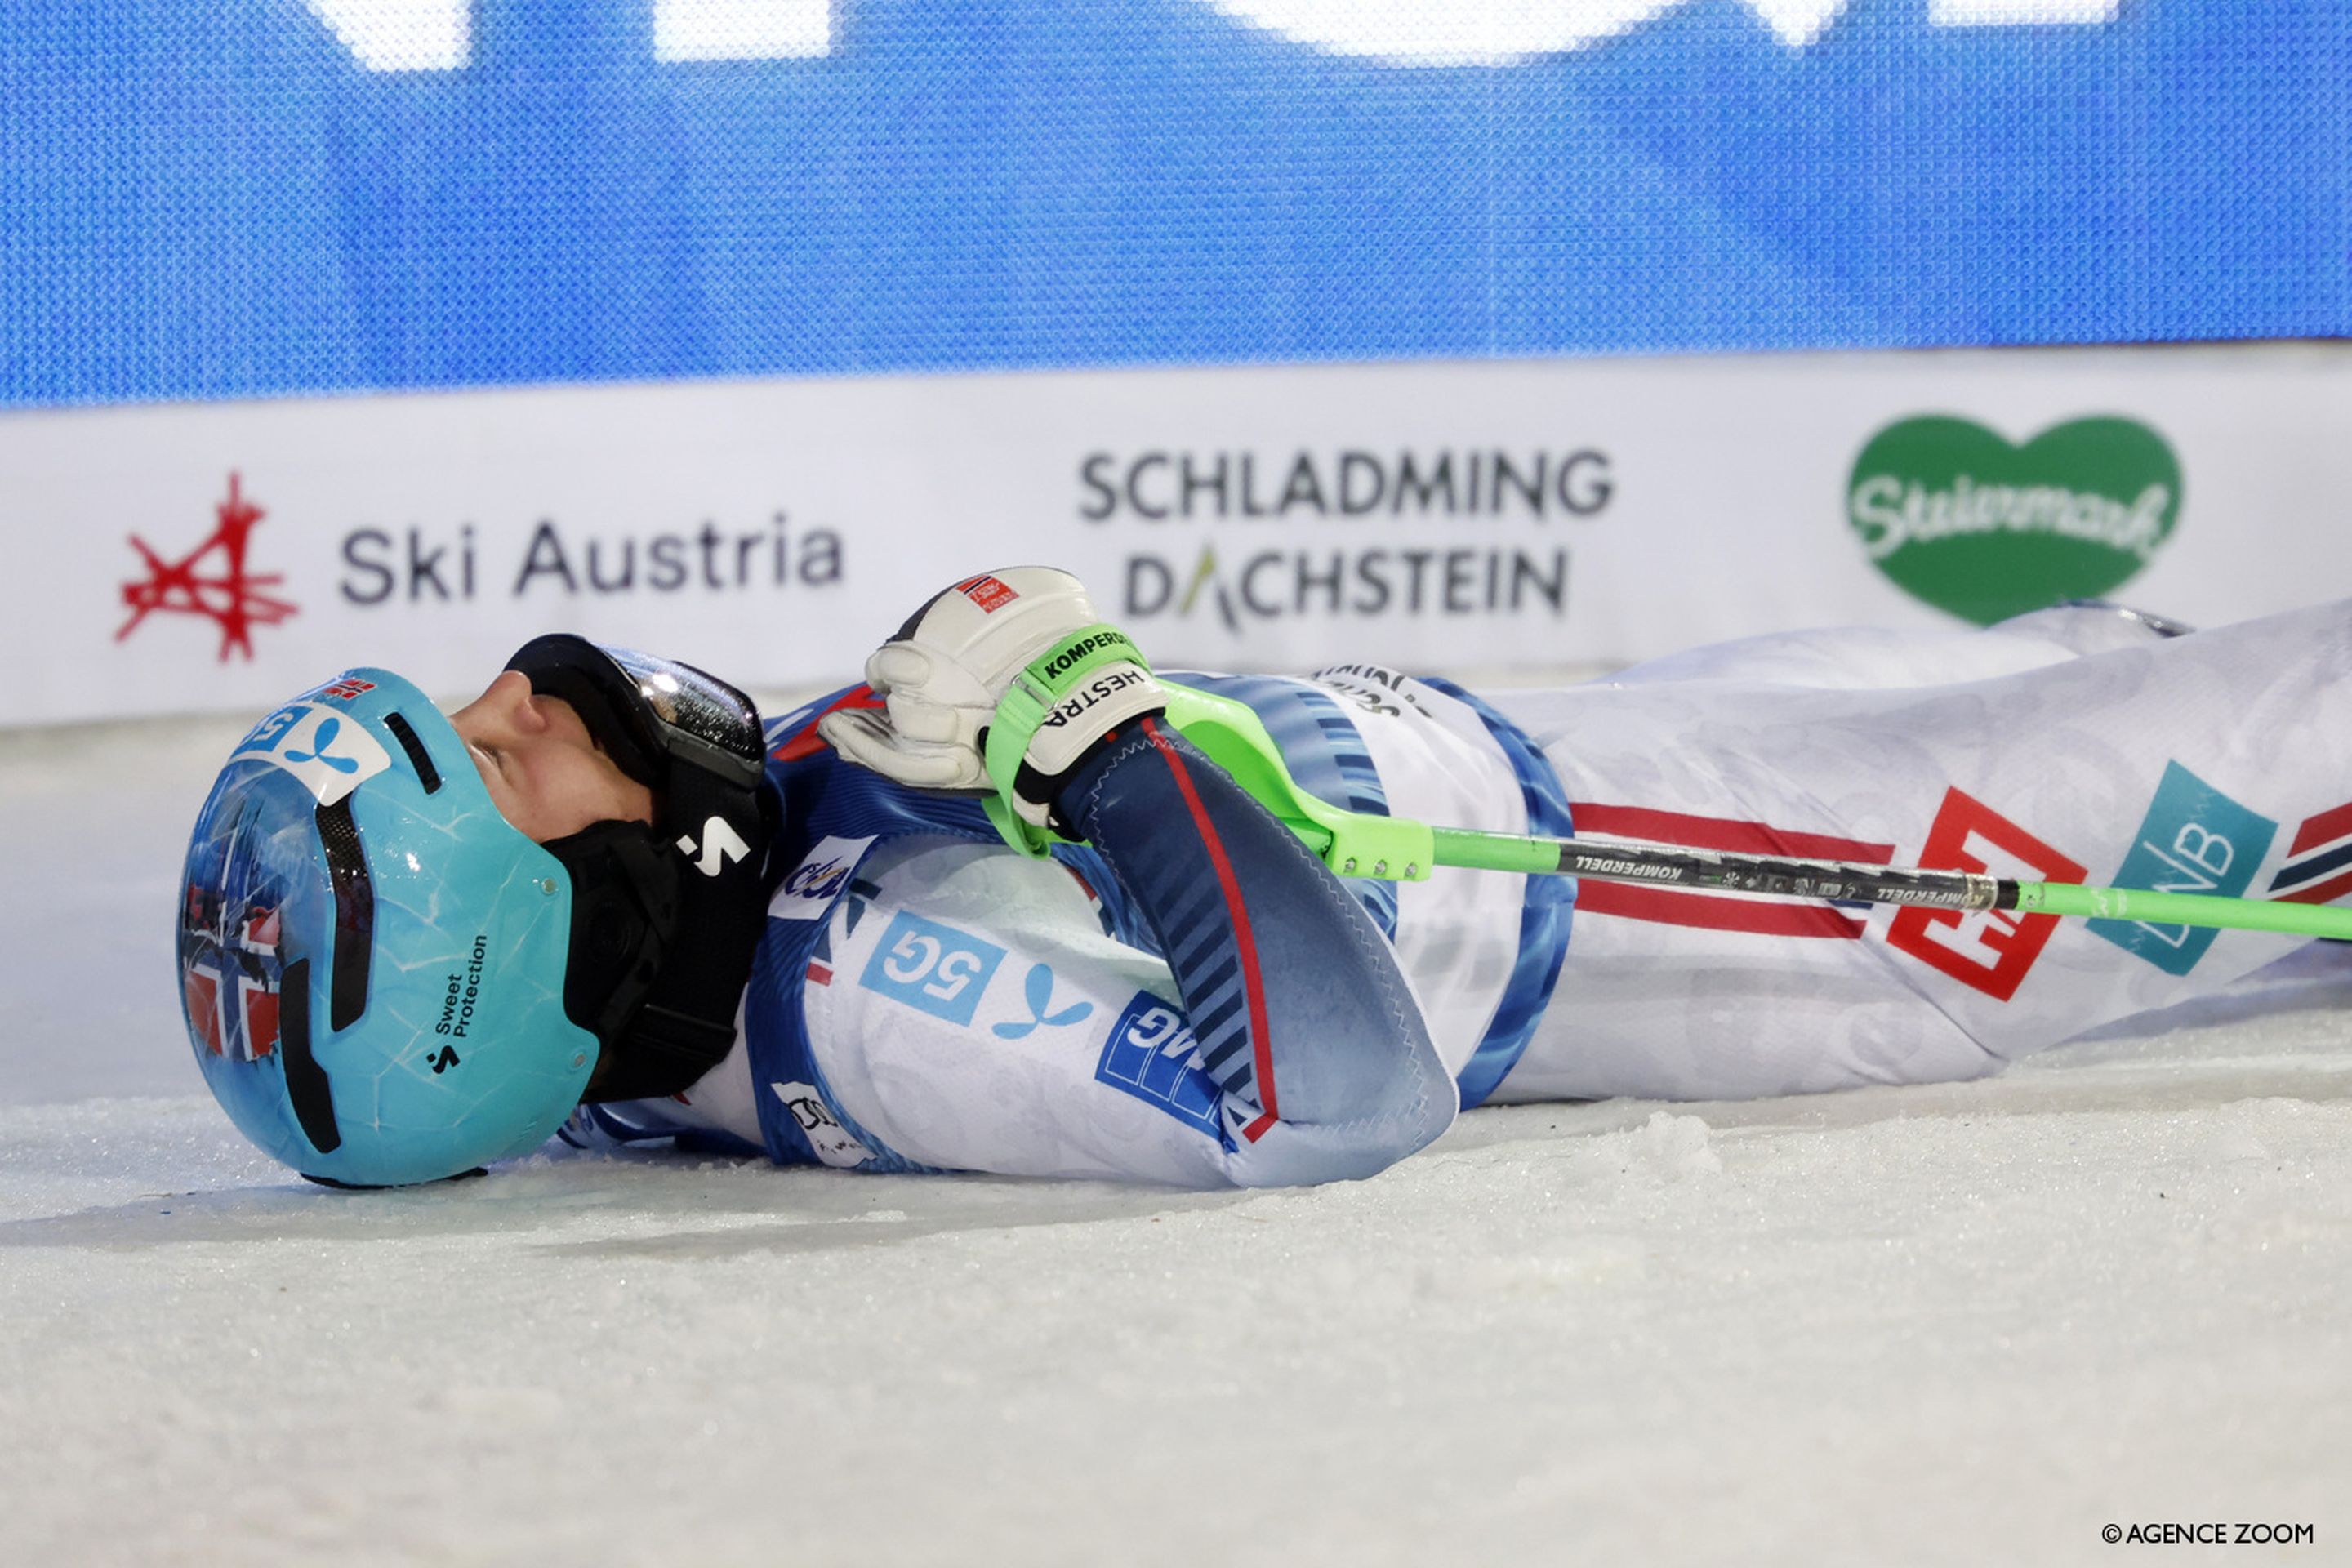 Timon Haugan (NOR) falls to the snow after skiing into the provisional lead on Wednesday (Agence Zoom)